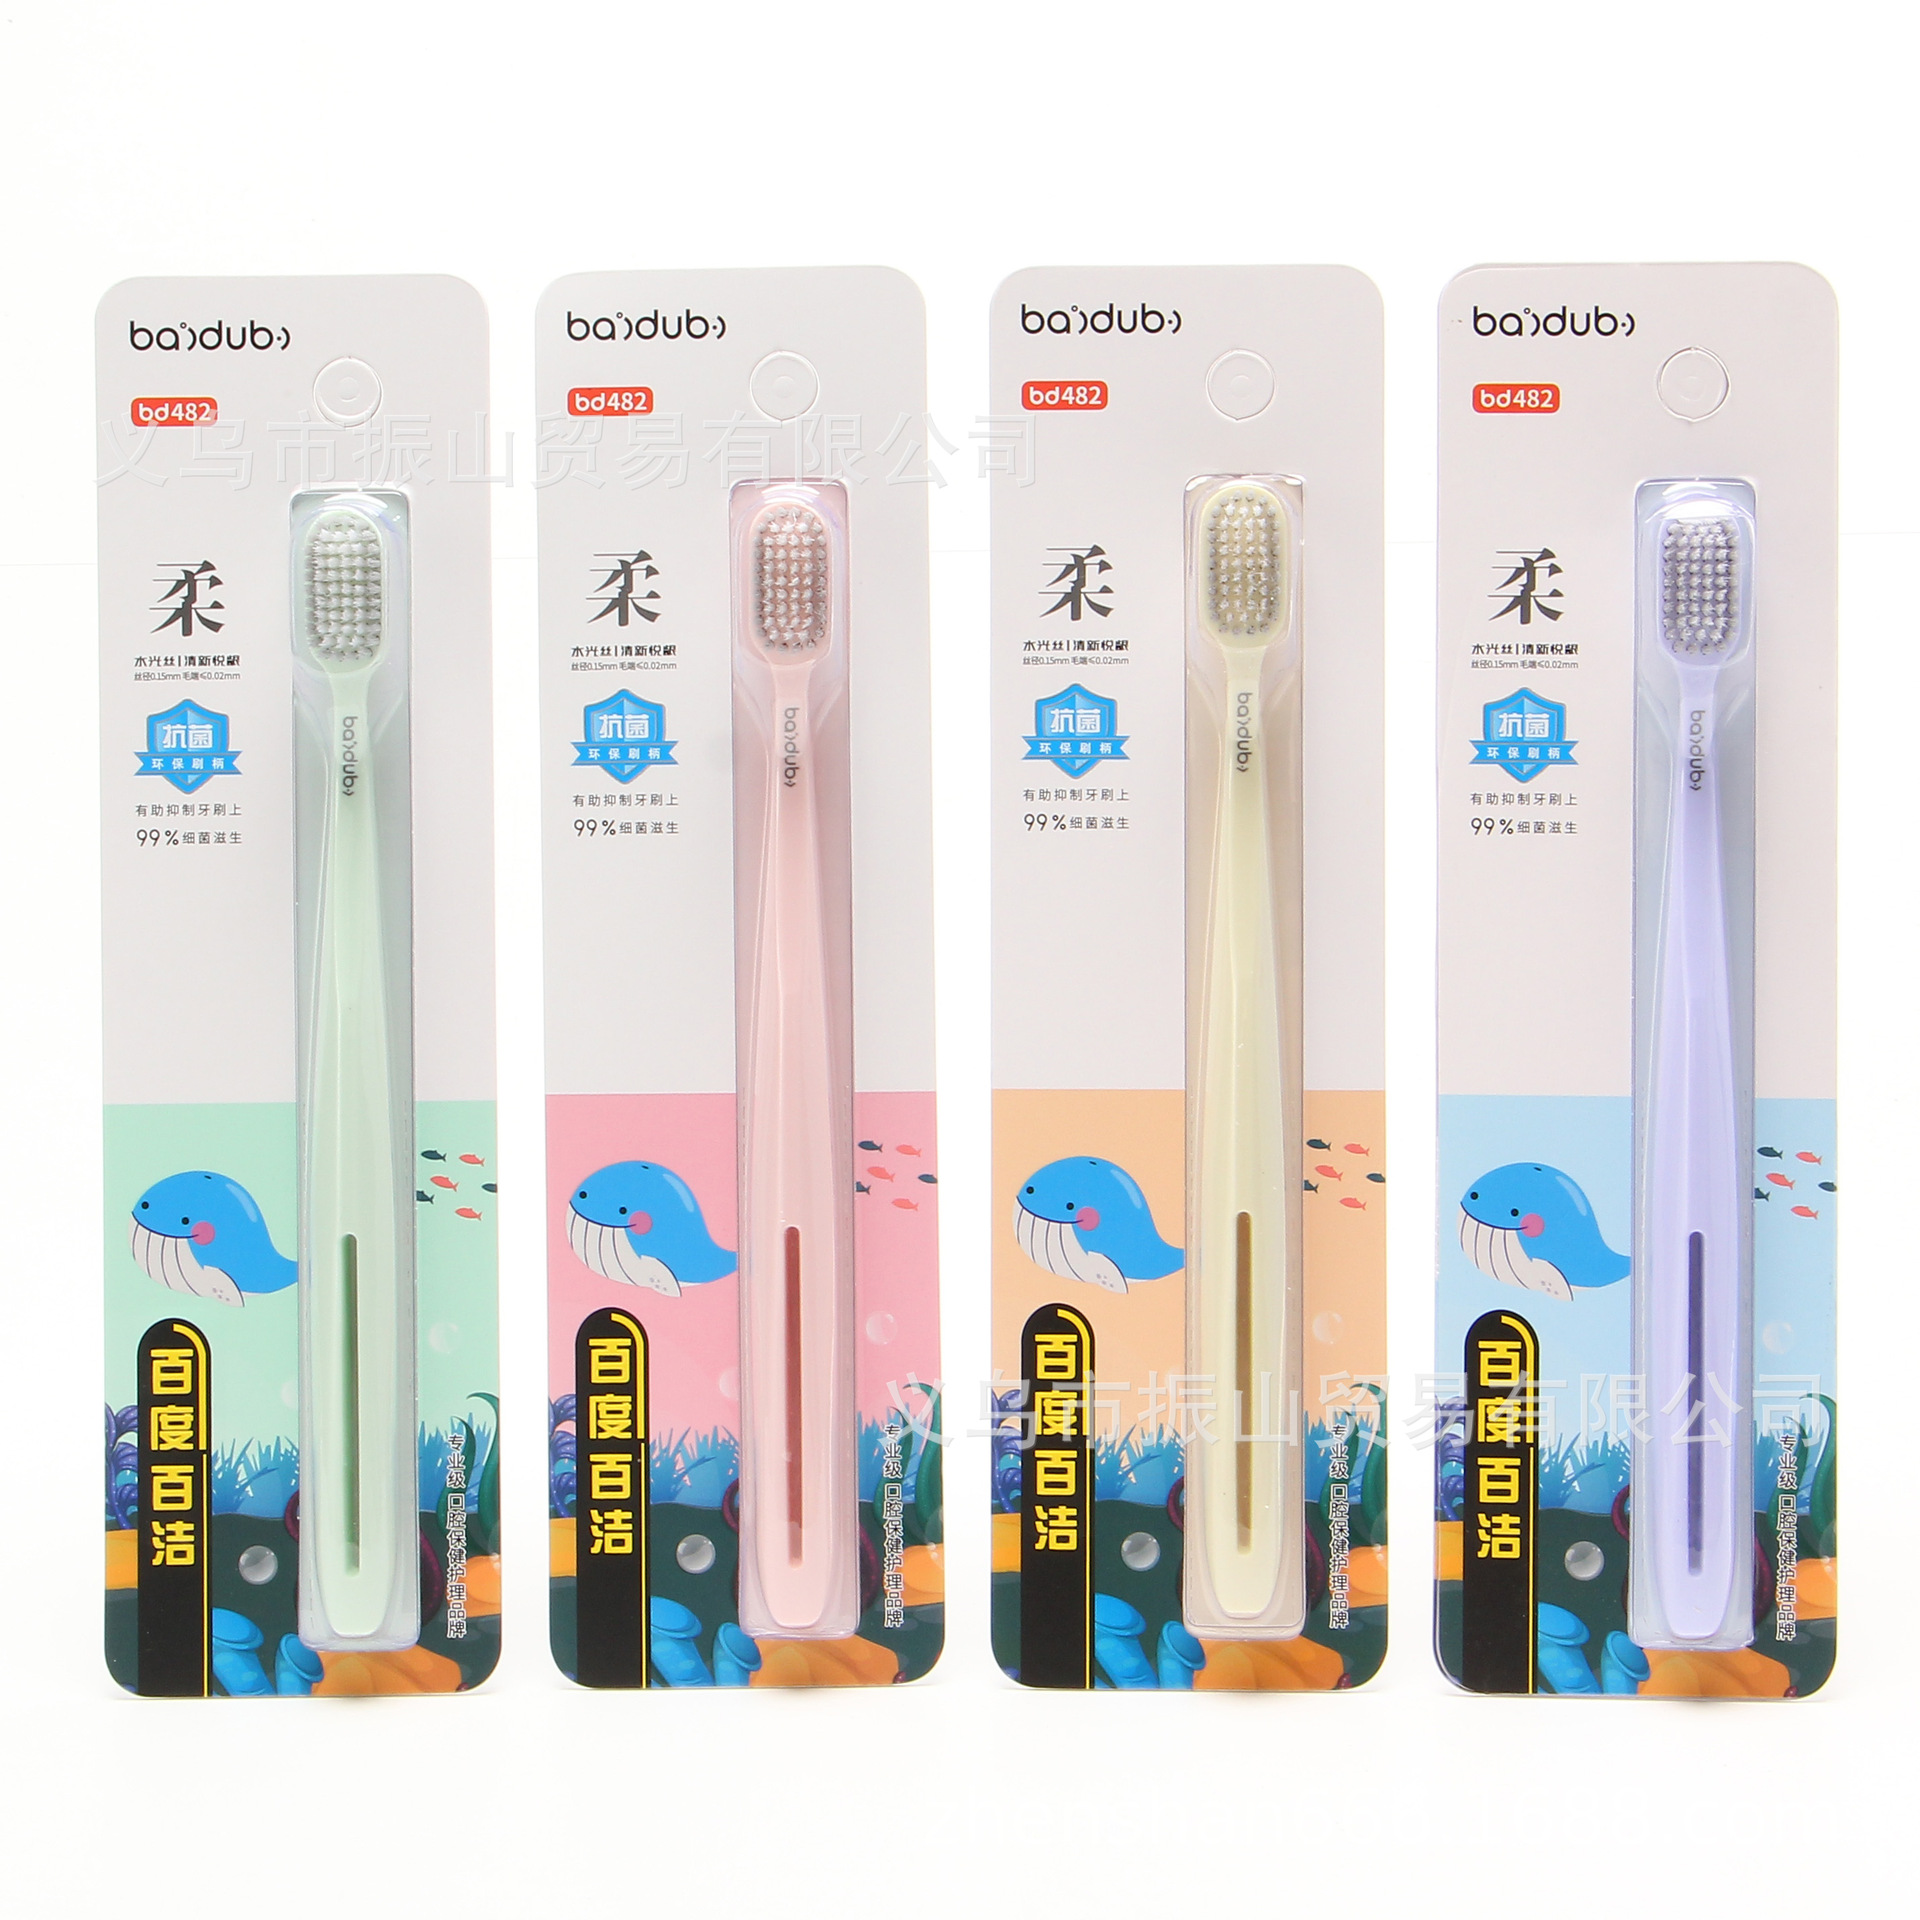 baidu baijie 482 personality luxury protection series minimalism wood light silk clear new yue gum brush handle with toothpaste squeezer